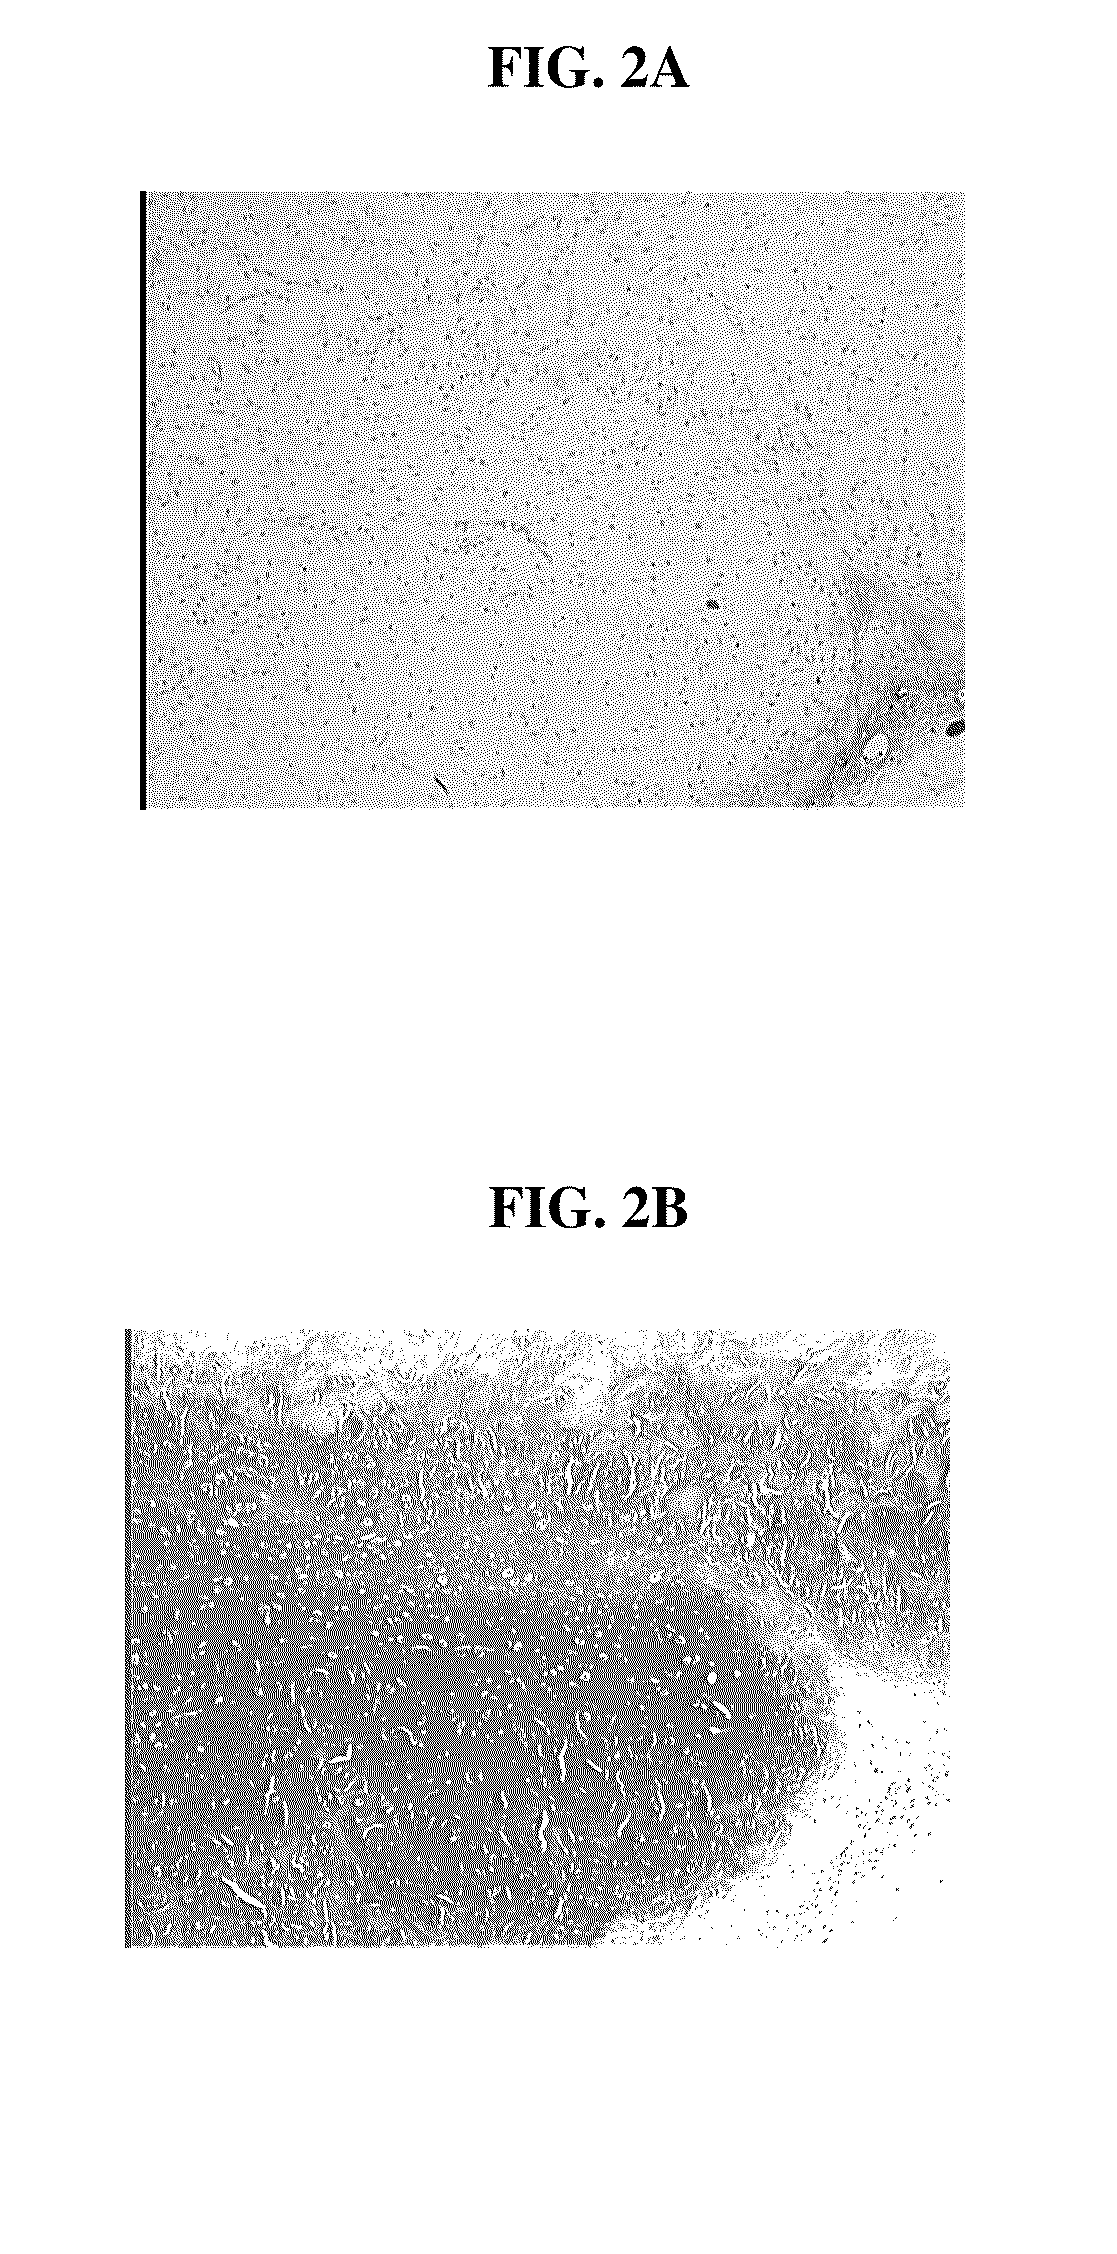 Biocompatible scaffolds with tissue fragments